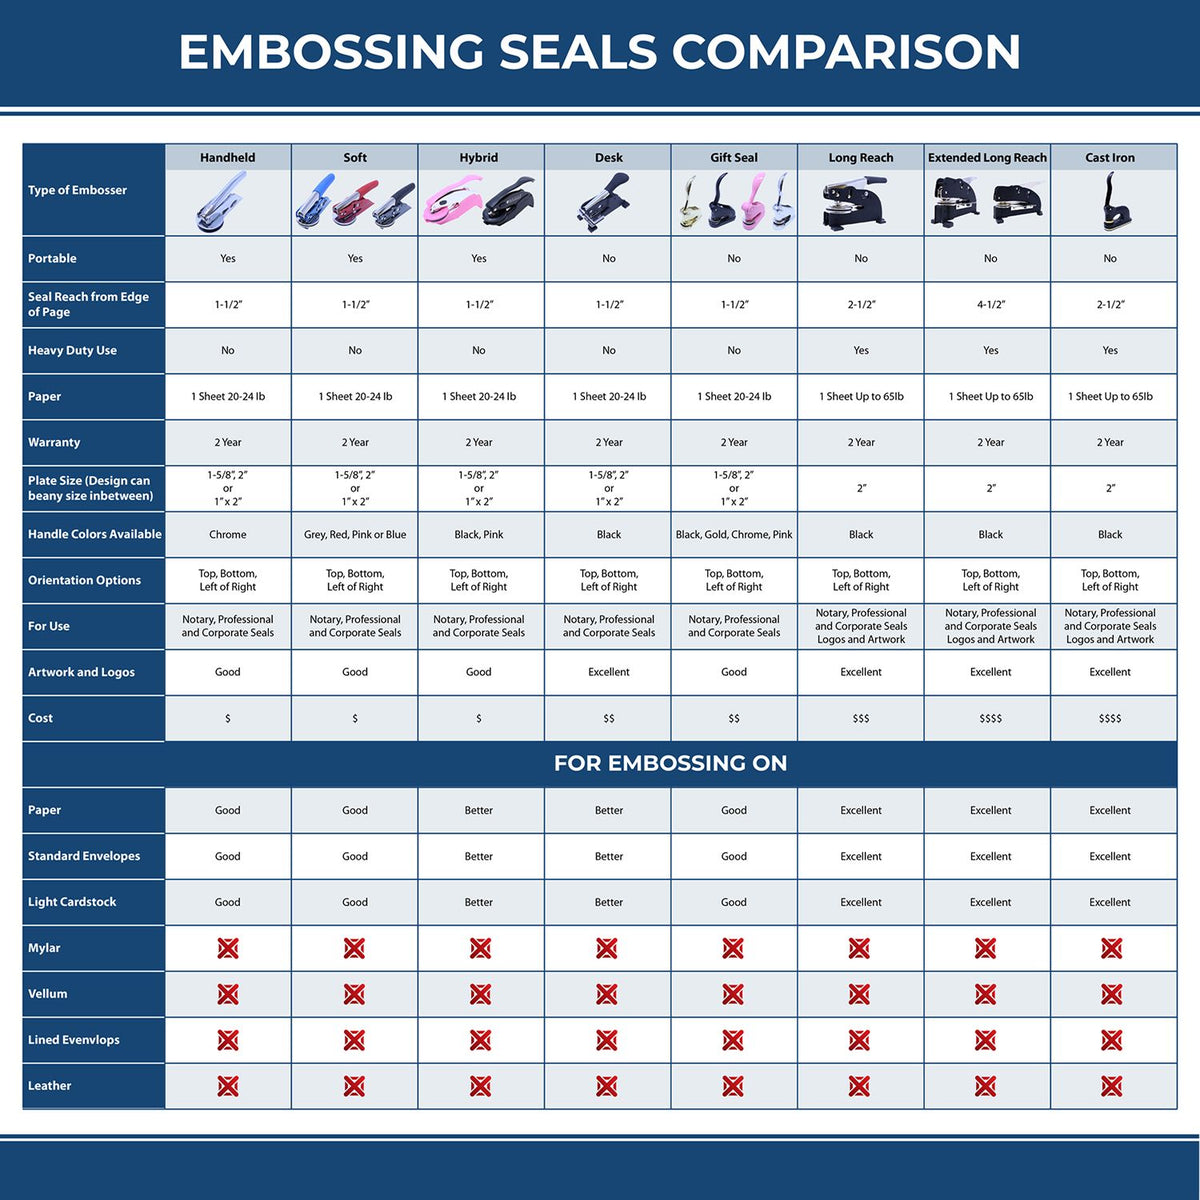 A comparison chart for the different types of mount models available for the Gift Alaska Geologist Seal